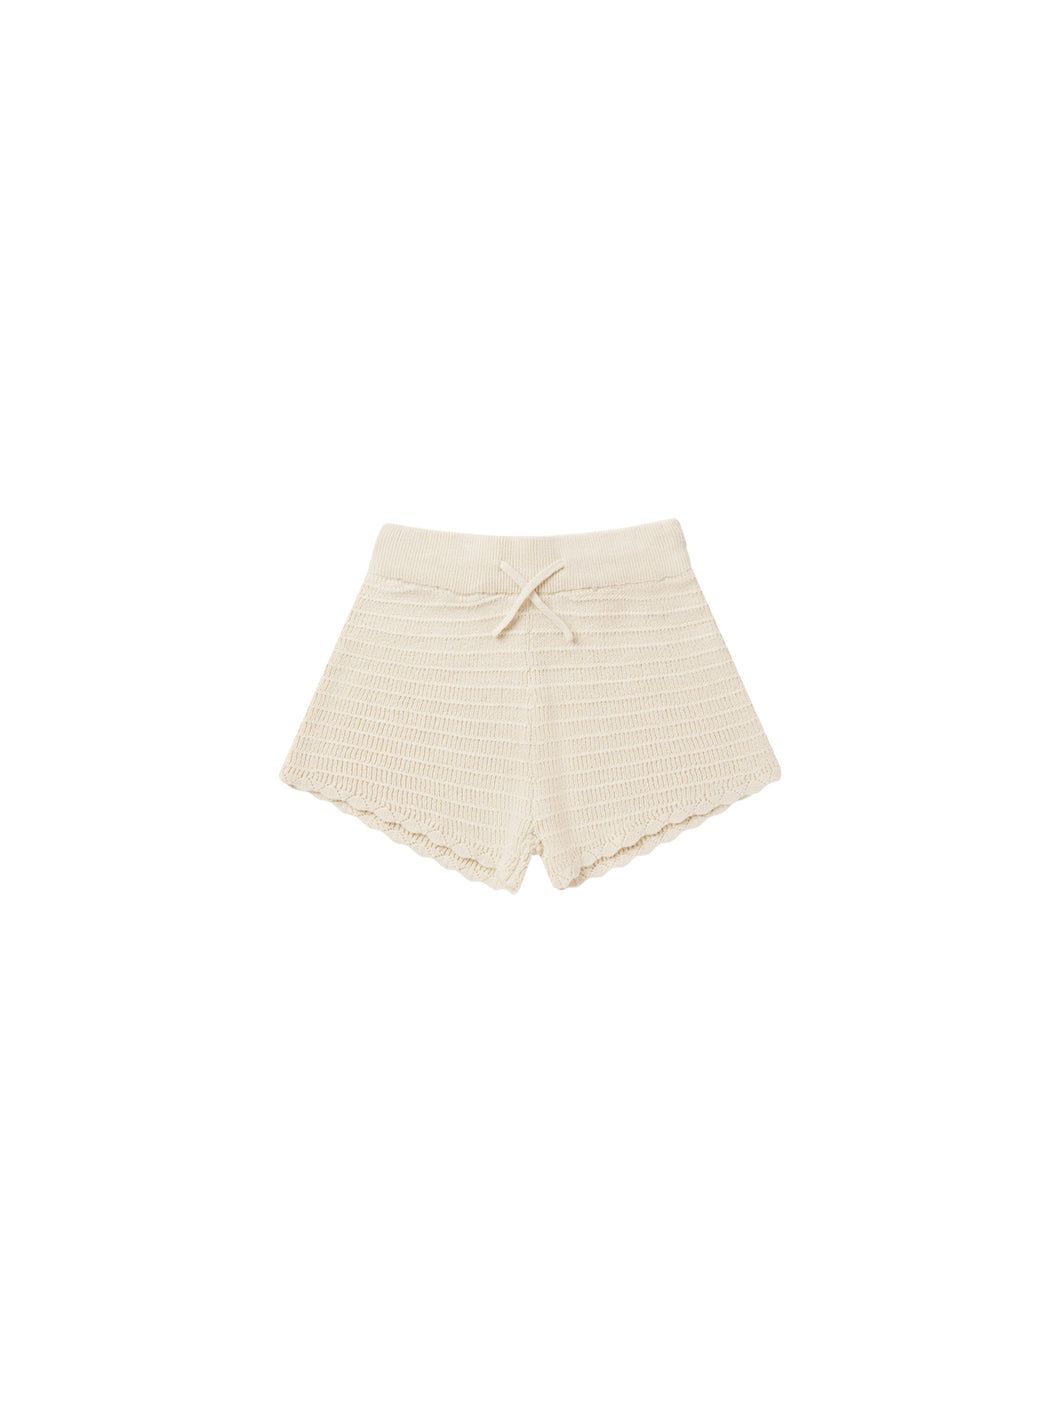 Beige knit shorts with a drawstring waistband. 